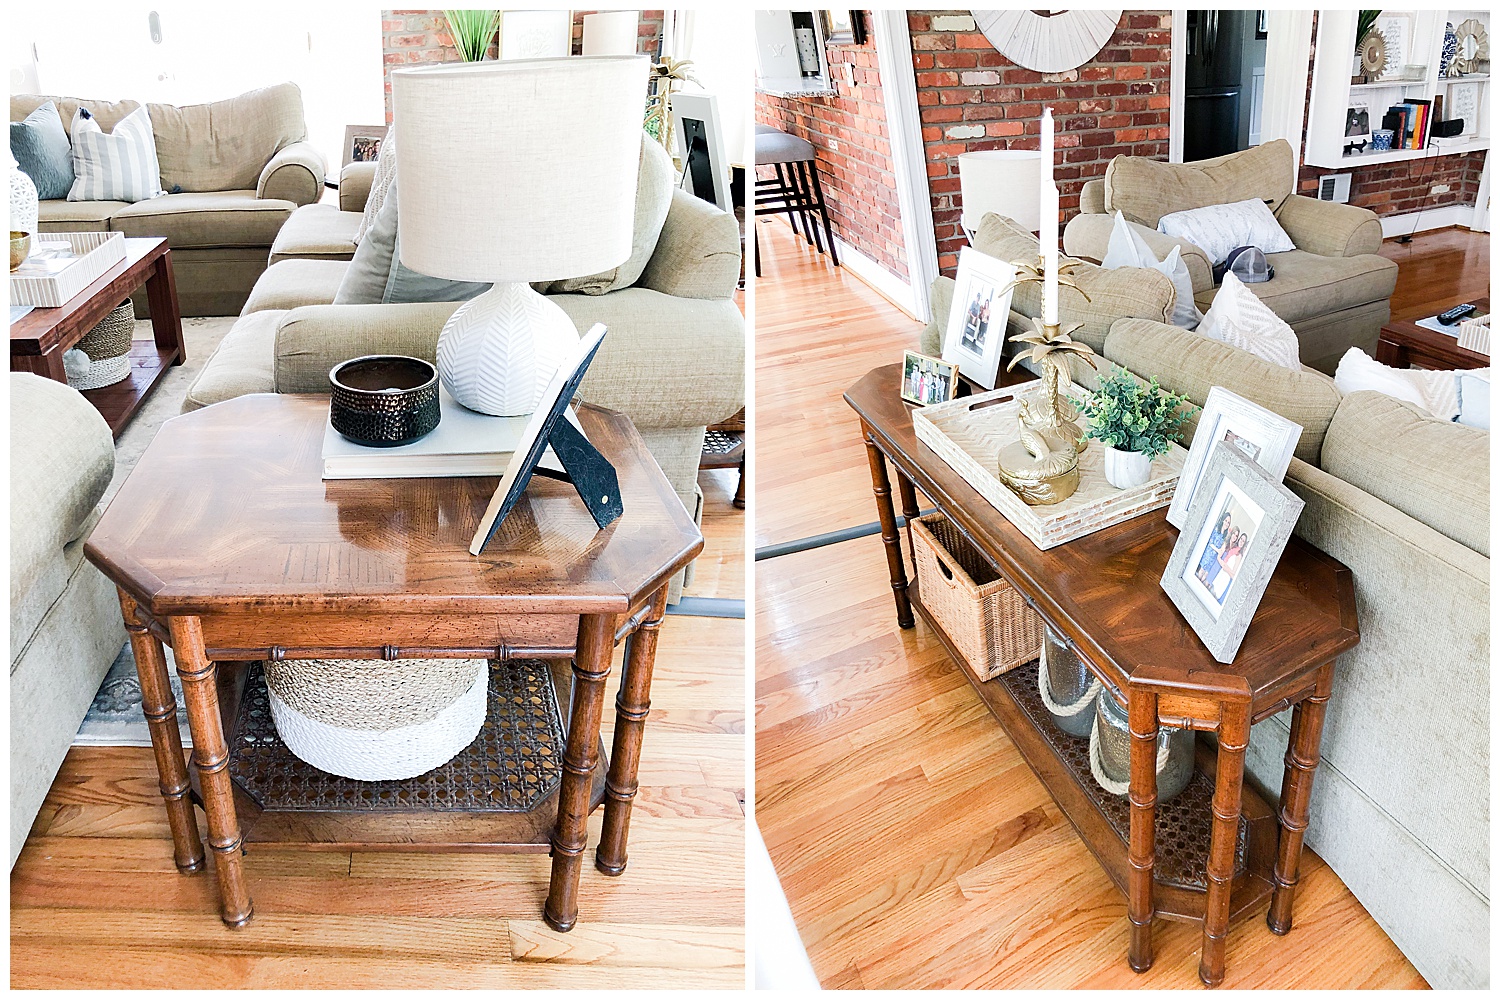 BAMBOO SIDE TABLE AND SOFA TABLE: $80